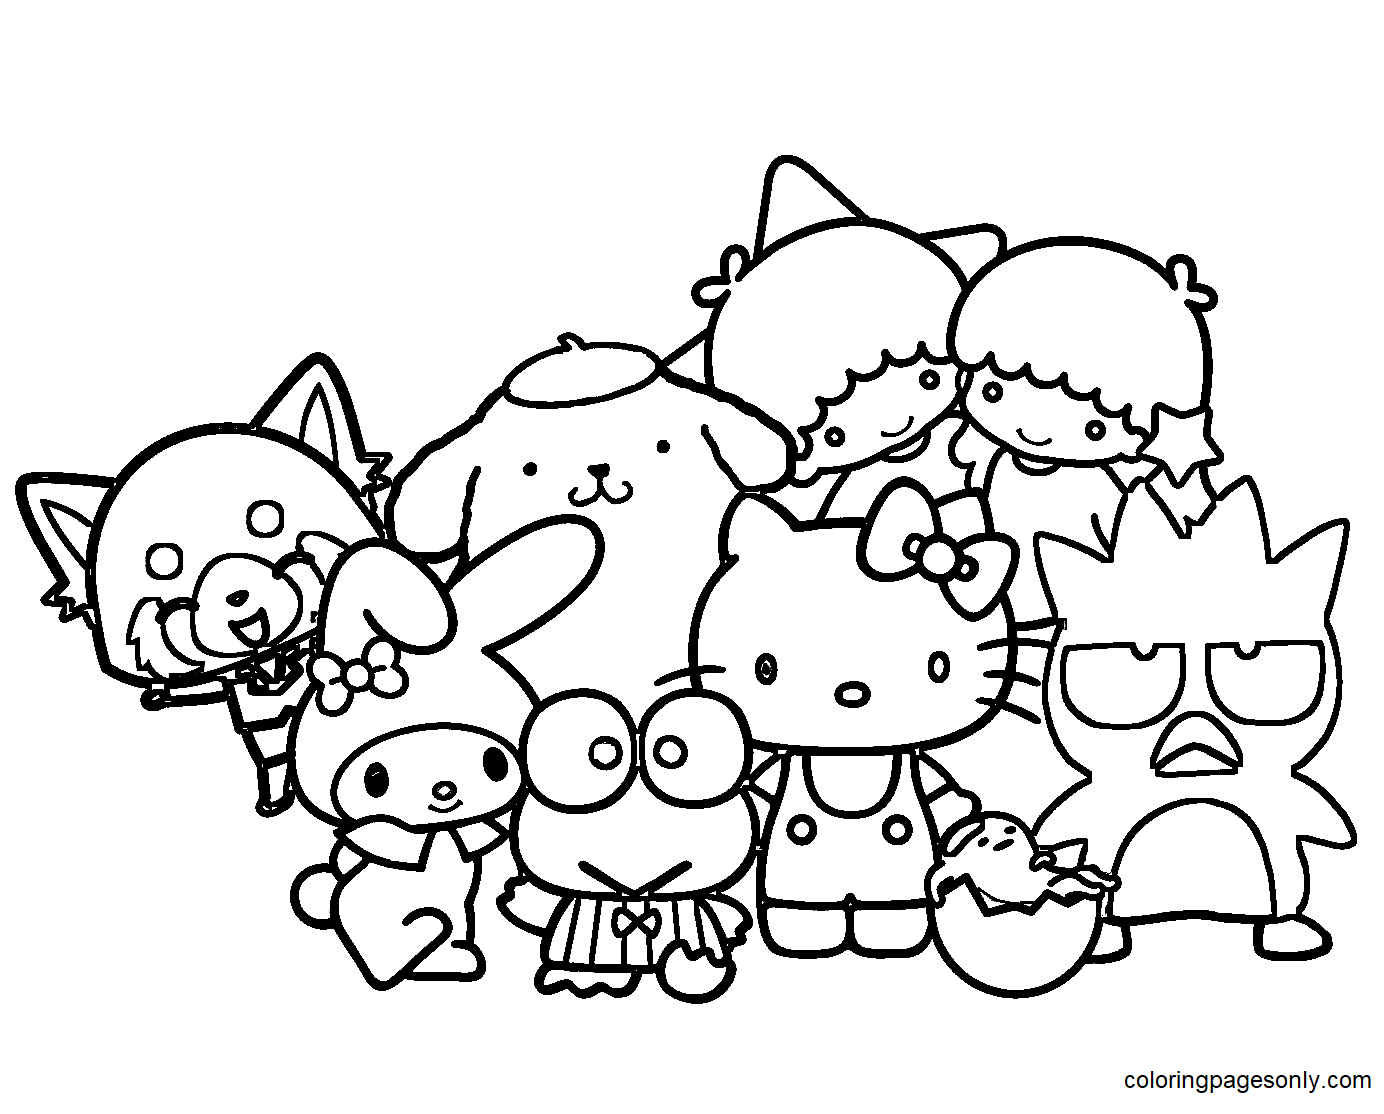 Sanrio Characters from Sanrio Characters